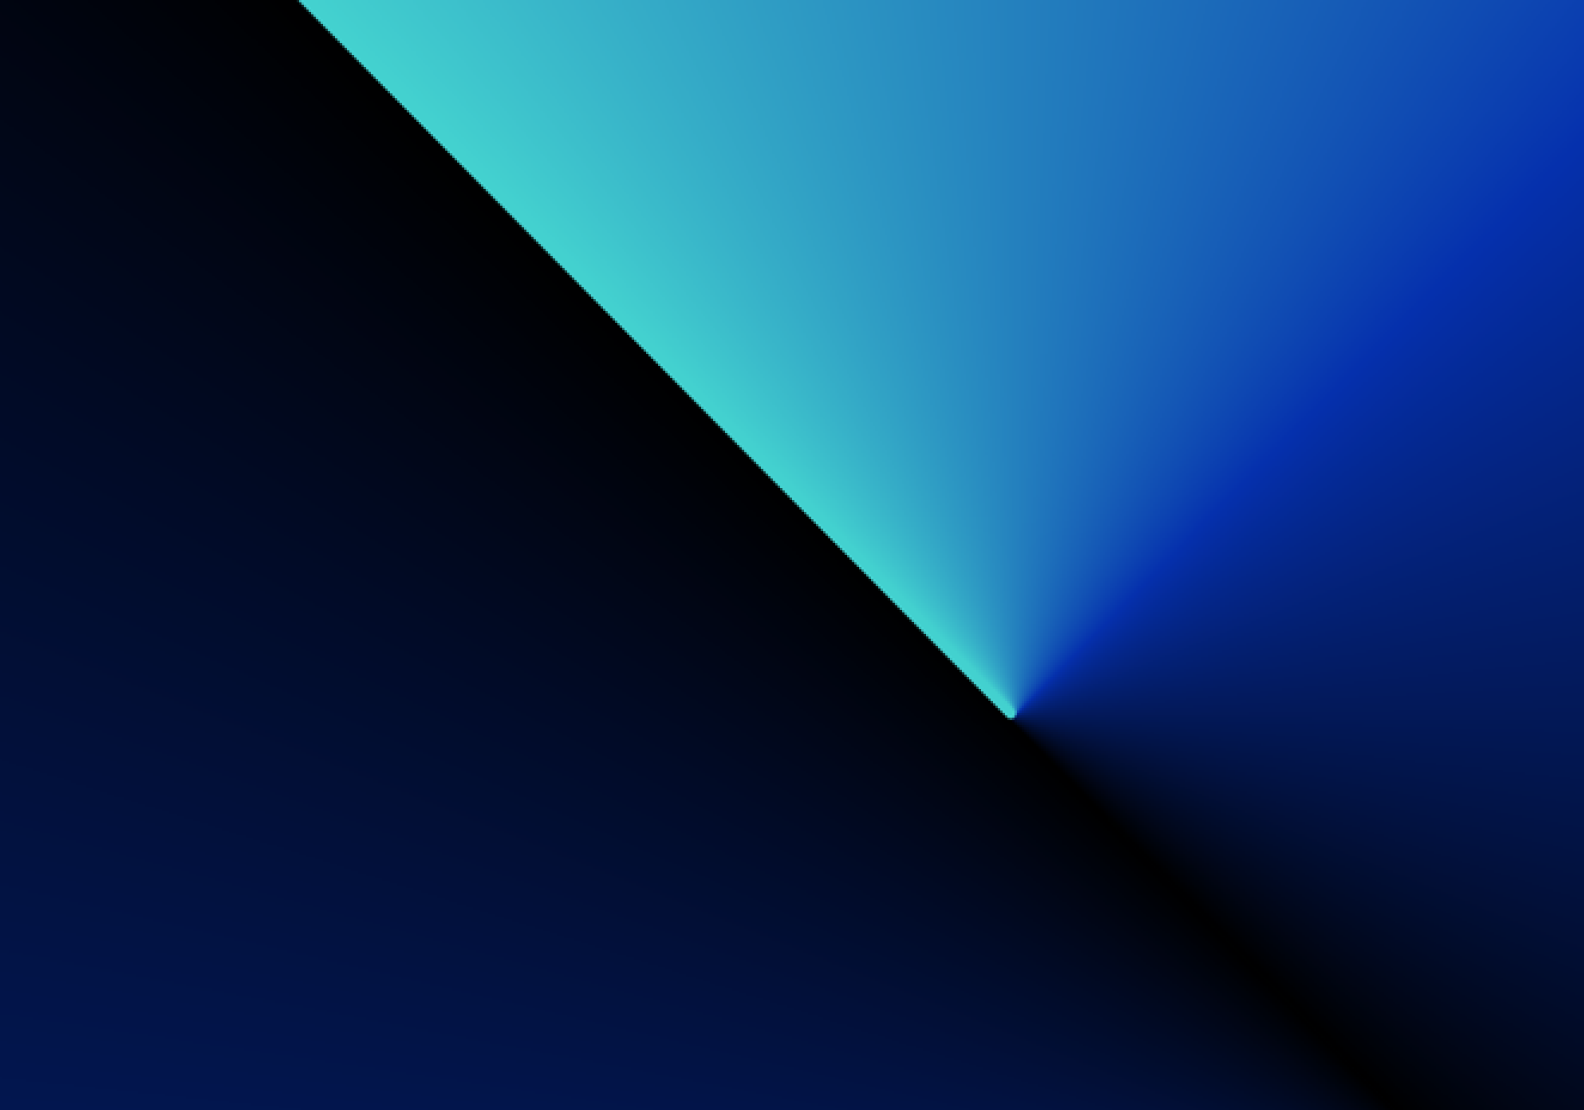 Black and blue gradient background